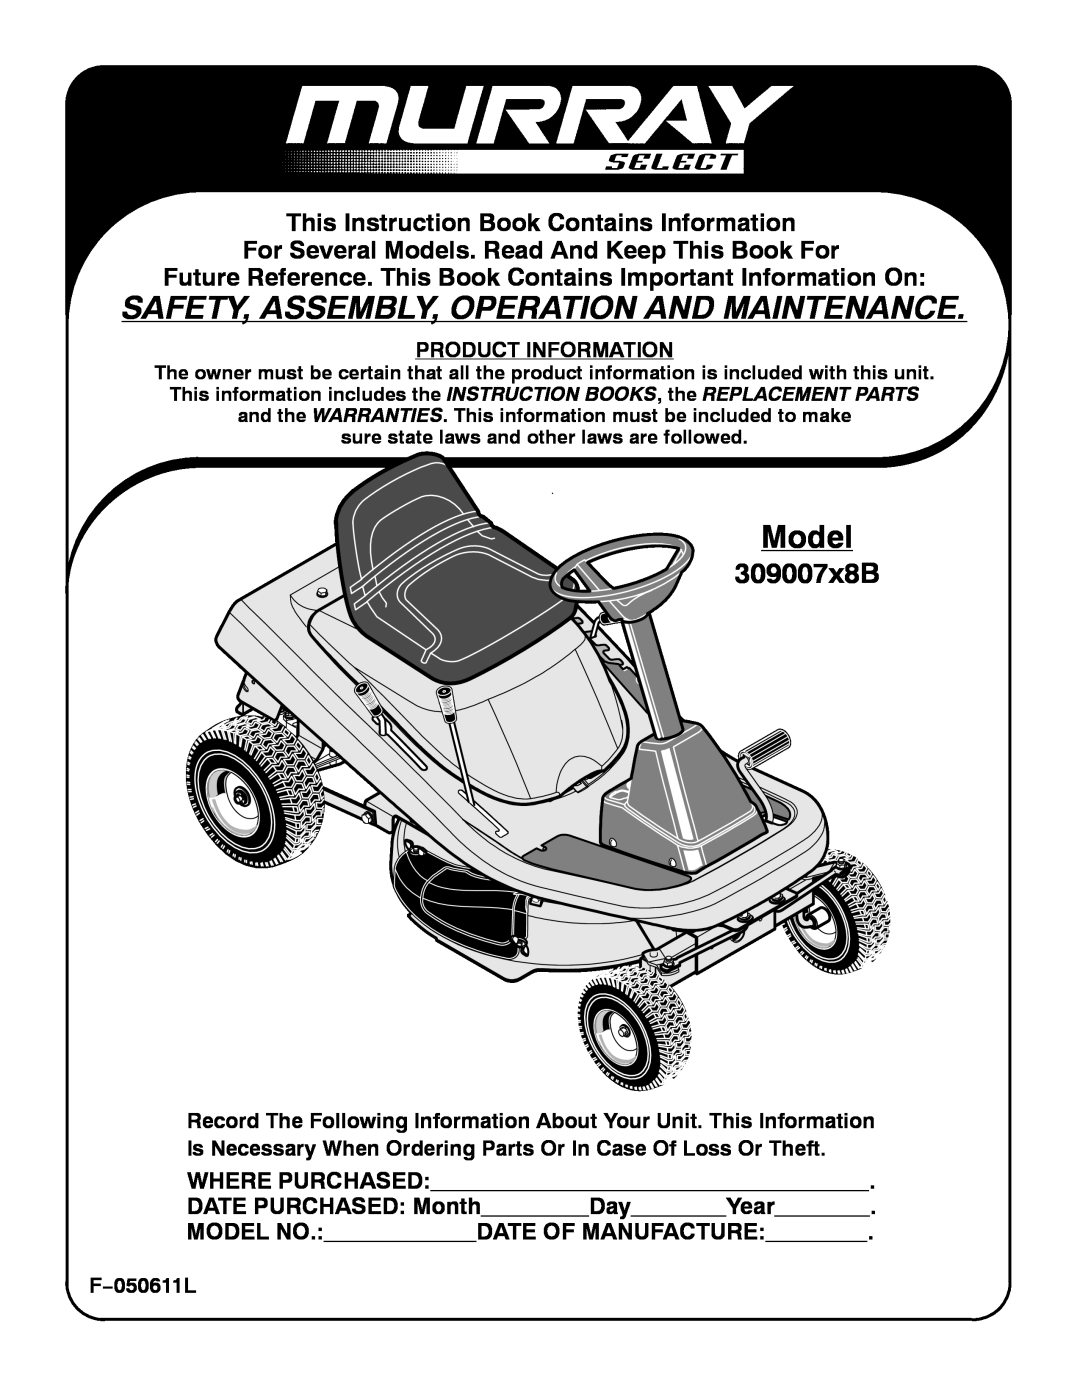 Murray 309007x8B manual Model, This Instruction Book Contains Information, Product Information, F−050611L, Where Purchased 